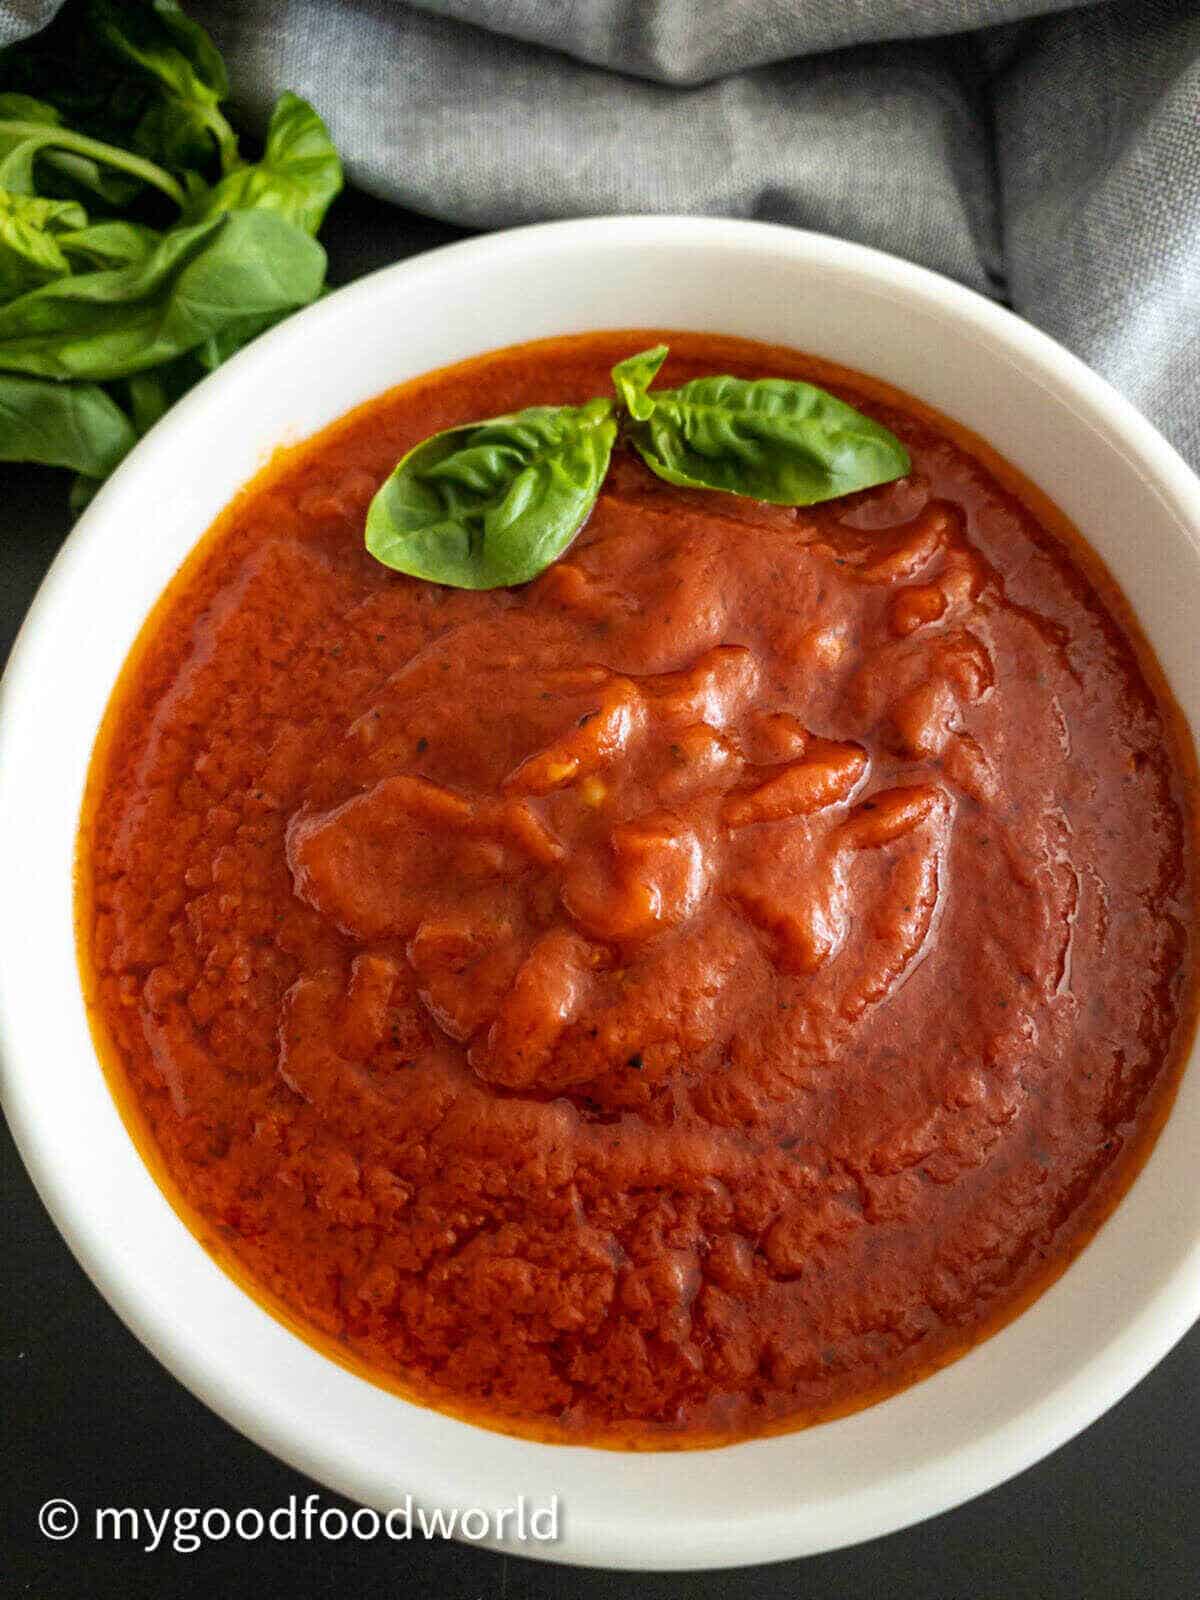 Hearty marinara sauce served in a white round bowl and garnished with two fresh basil leaves.